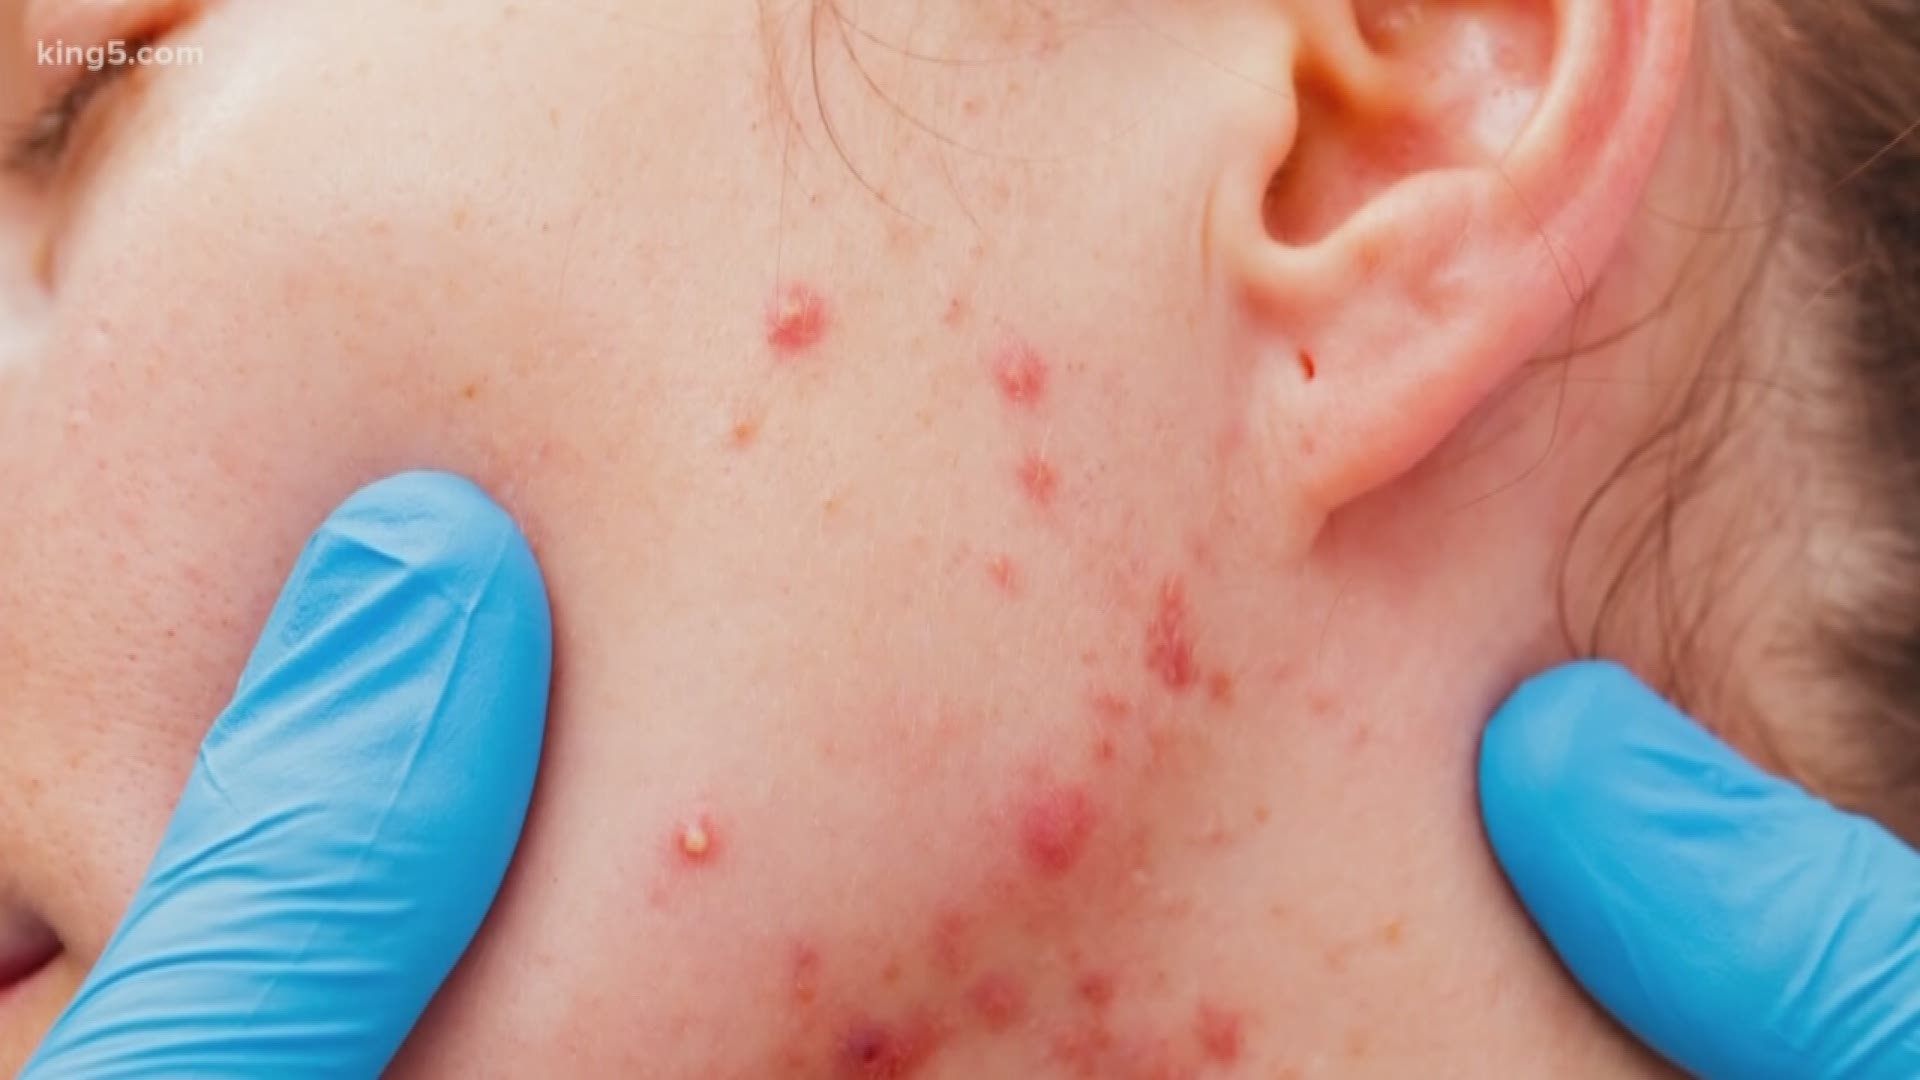 Health officials expect the current measles outbreak will continue to grow over the coming weeks and months.